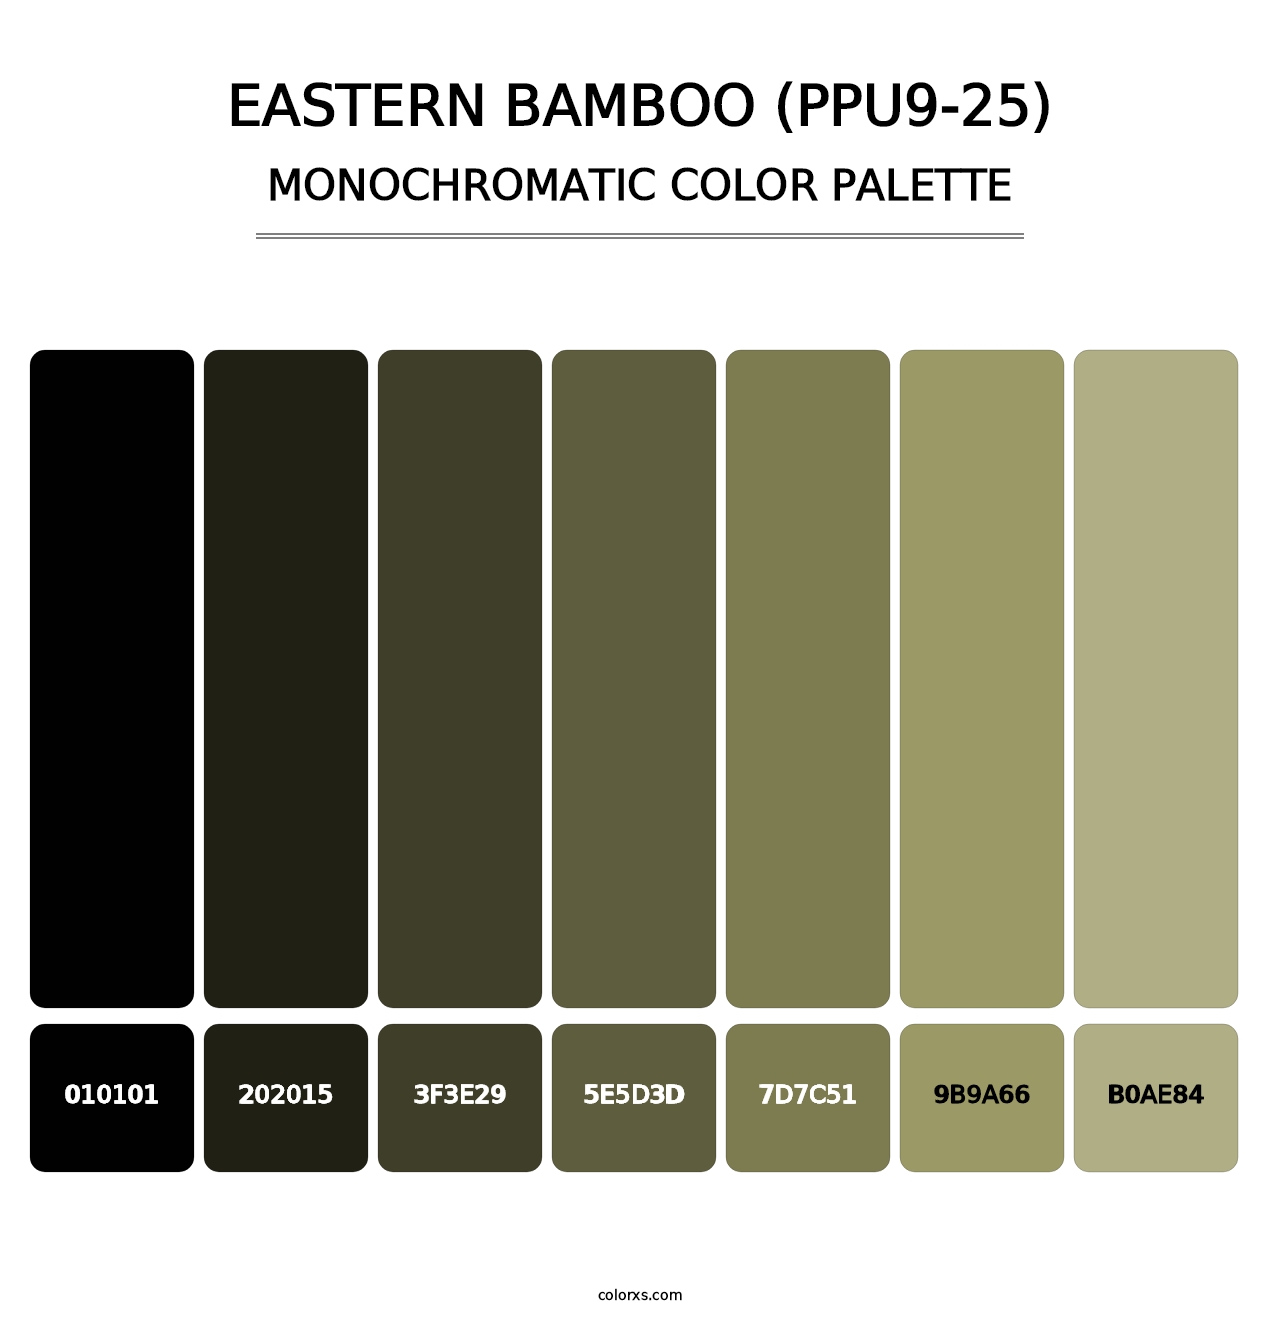 Eastern Bamboo (PPU9-25) - Monochromatic Color Palette